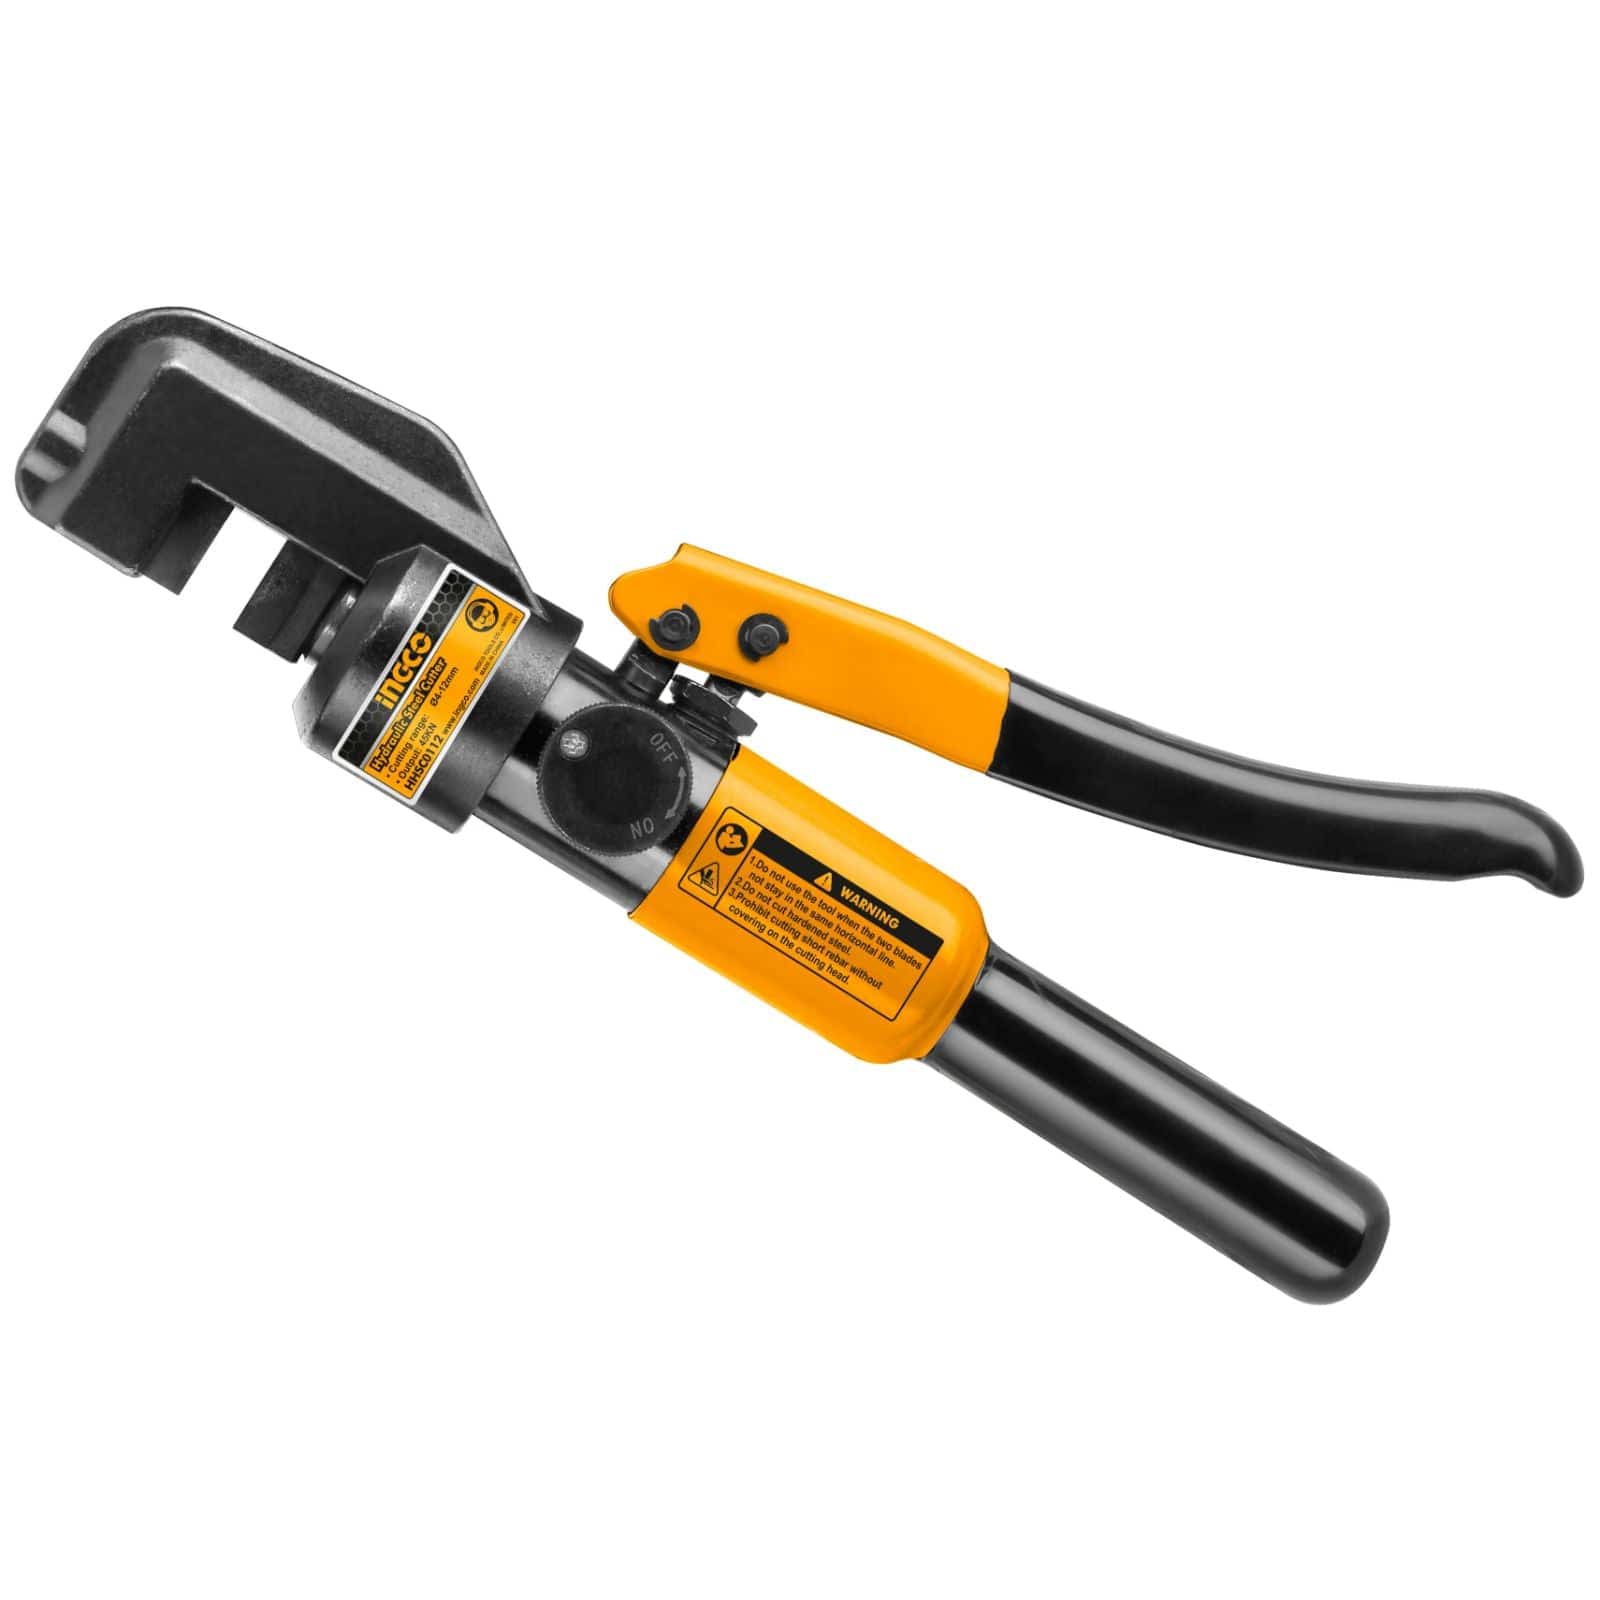 Buy Ingco 45KN Hydraulic Crimping Tool - HHCT0170 in Accra, Ghana | Supply Master Specialty Power Tool Buy Tools hardware Building materials